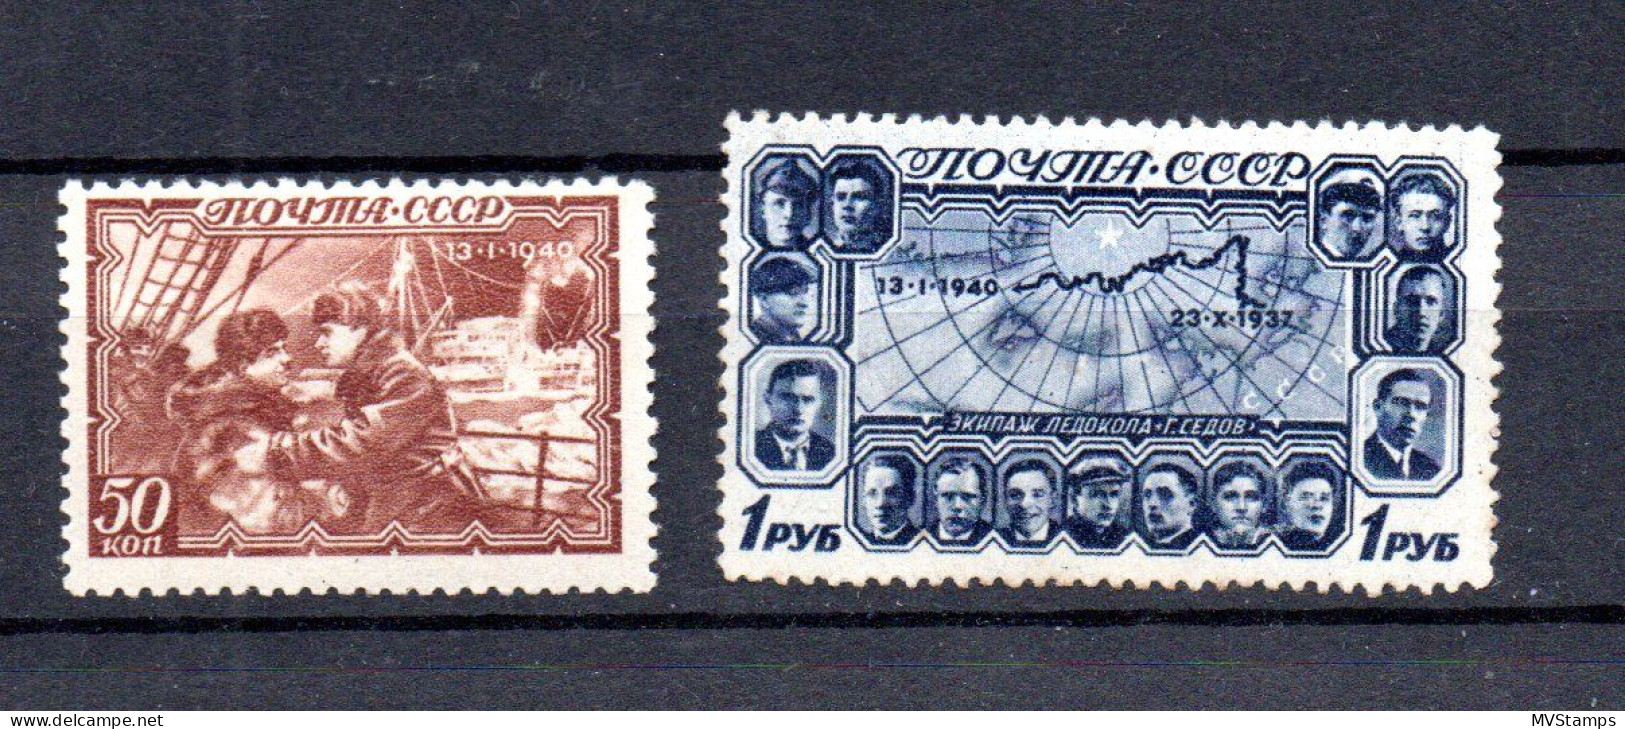 Russia 1940 Old Polar Stamps "G. Sedow" (Michel 743/44) MLH - Unused Stamps